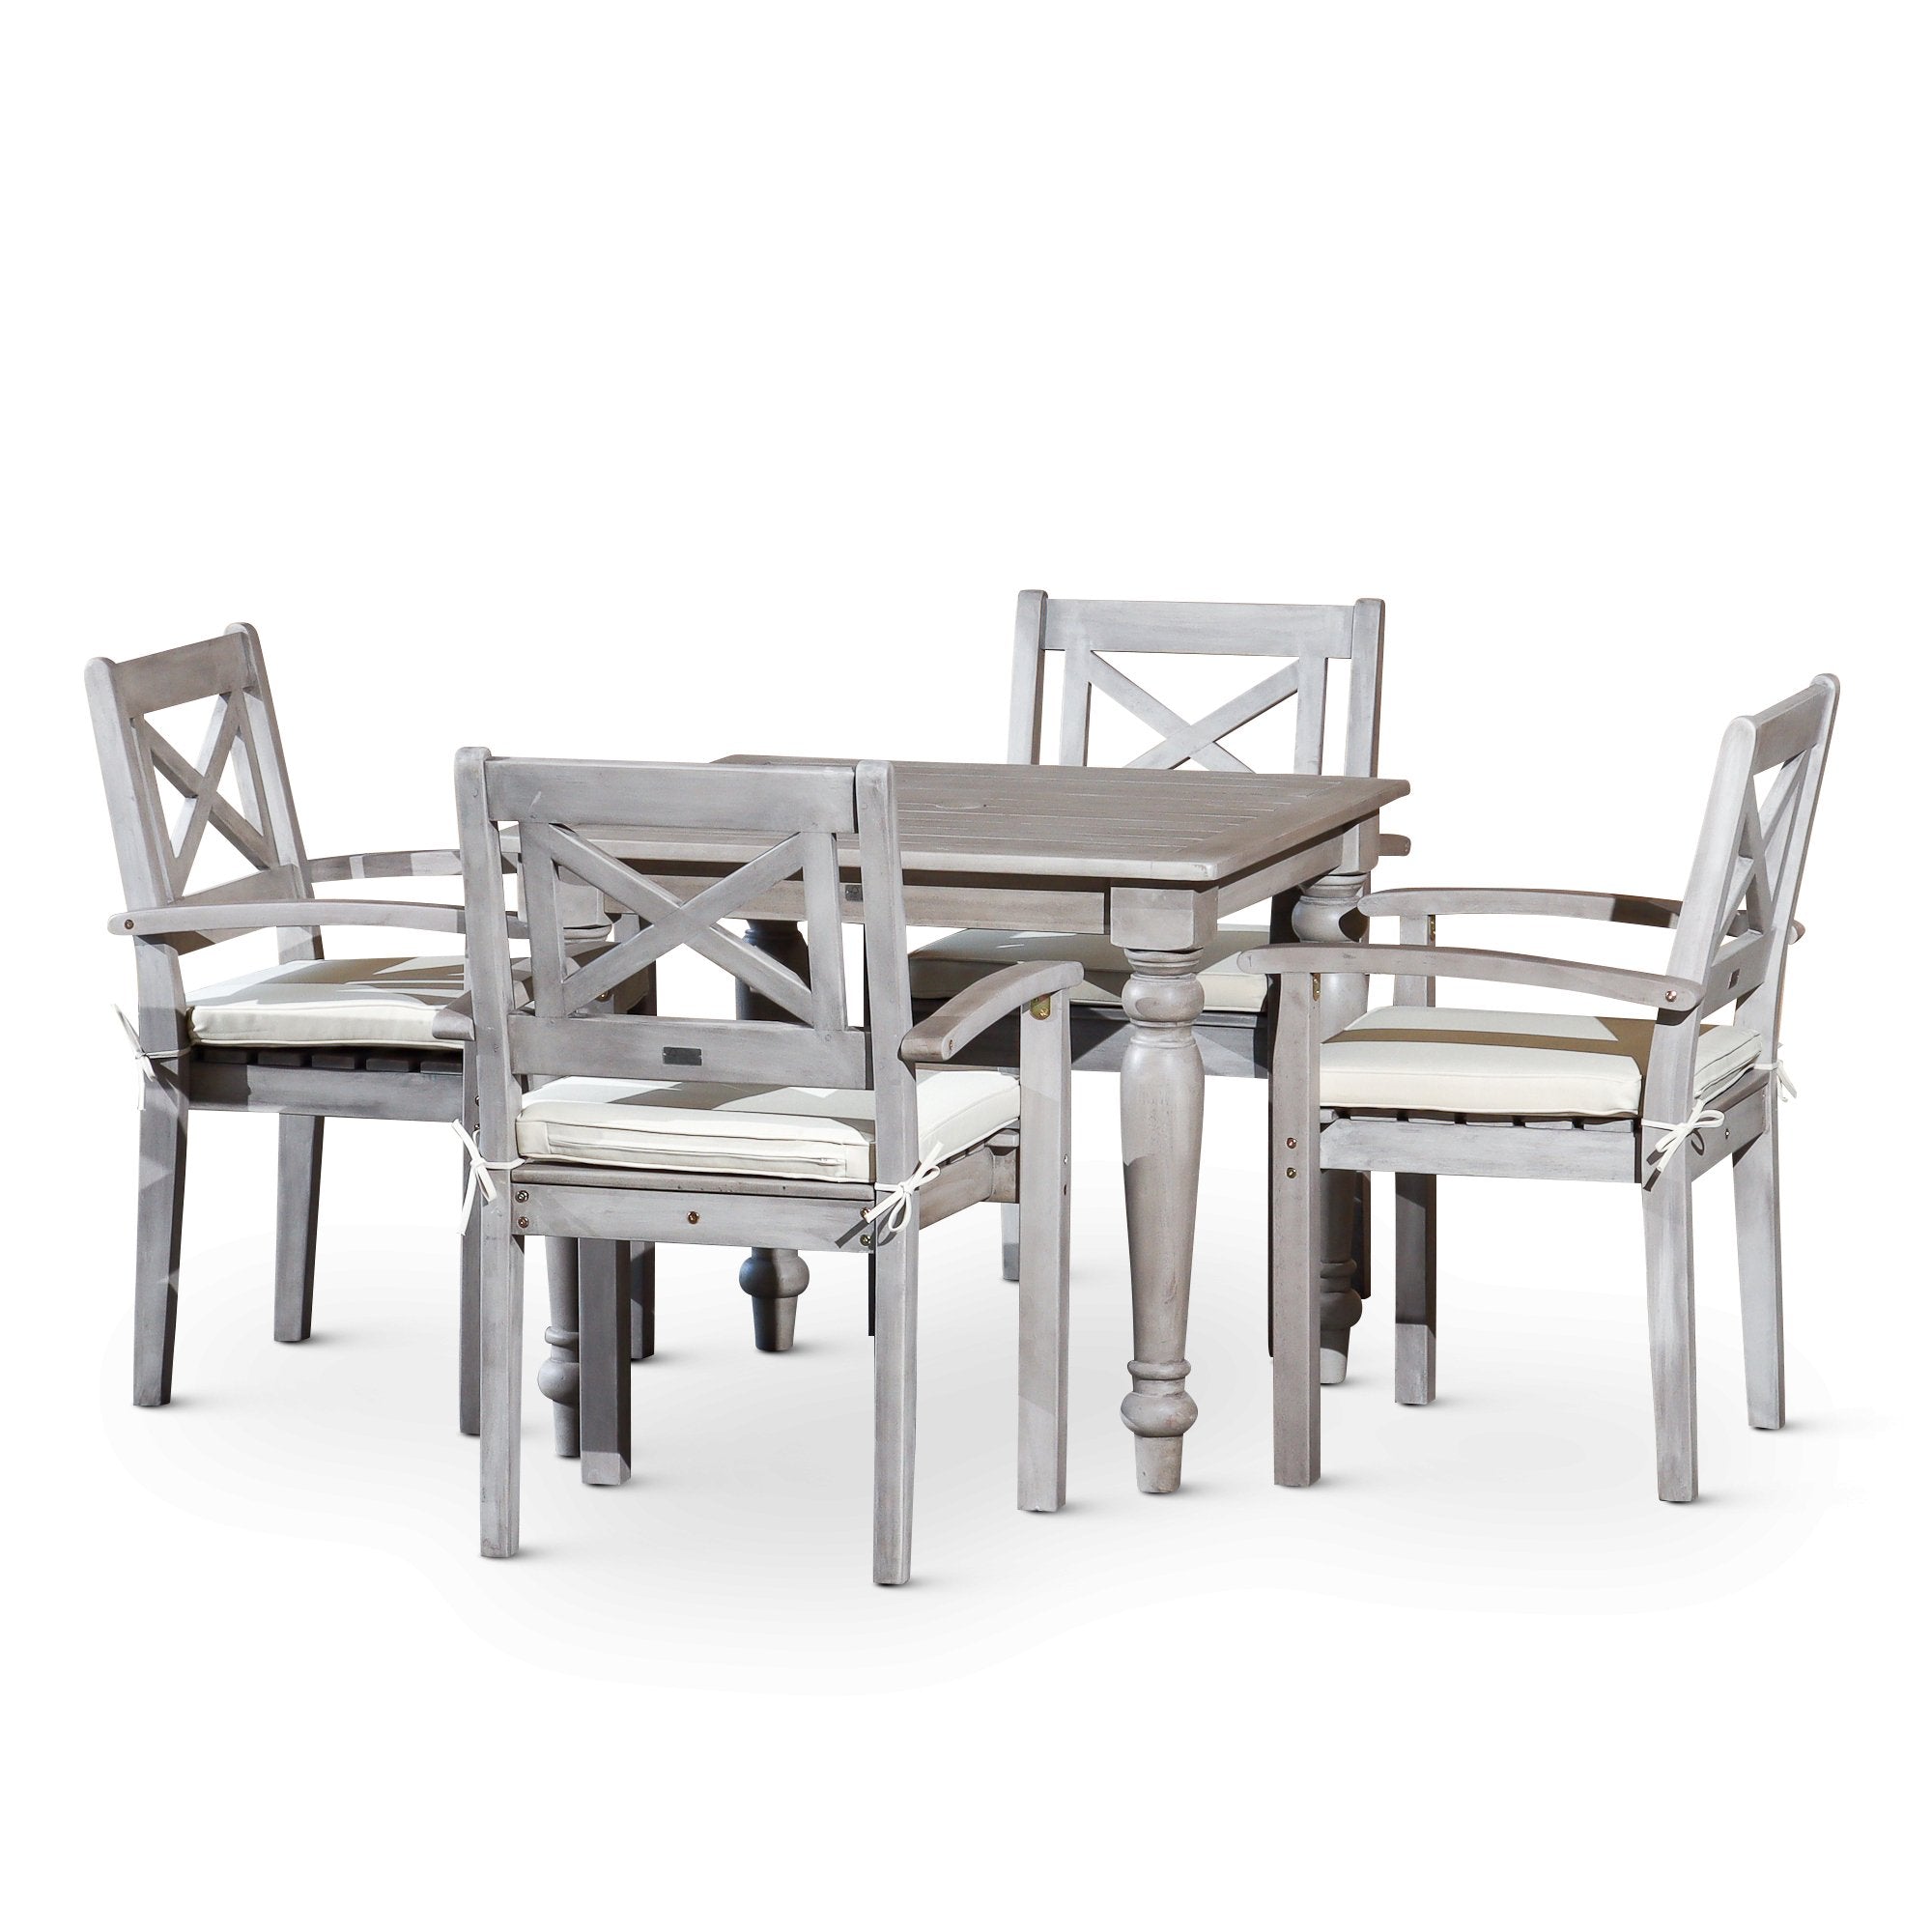 Square-Outdoor-5-piece-Dining-Set-Outdoor-Furniture-Sets